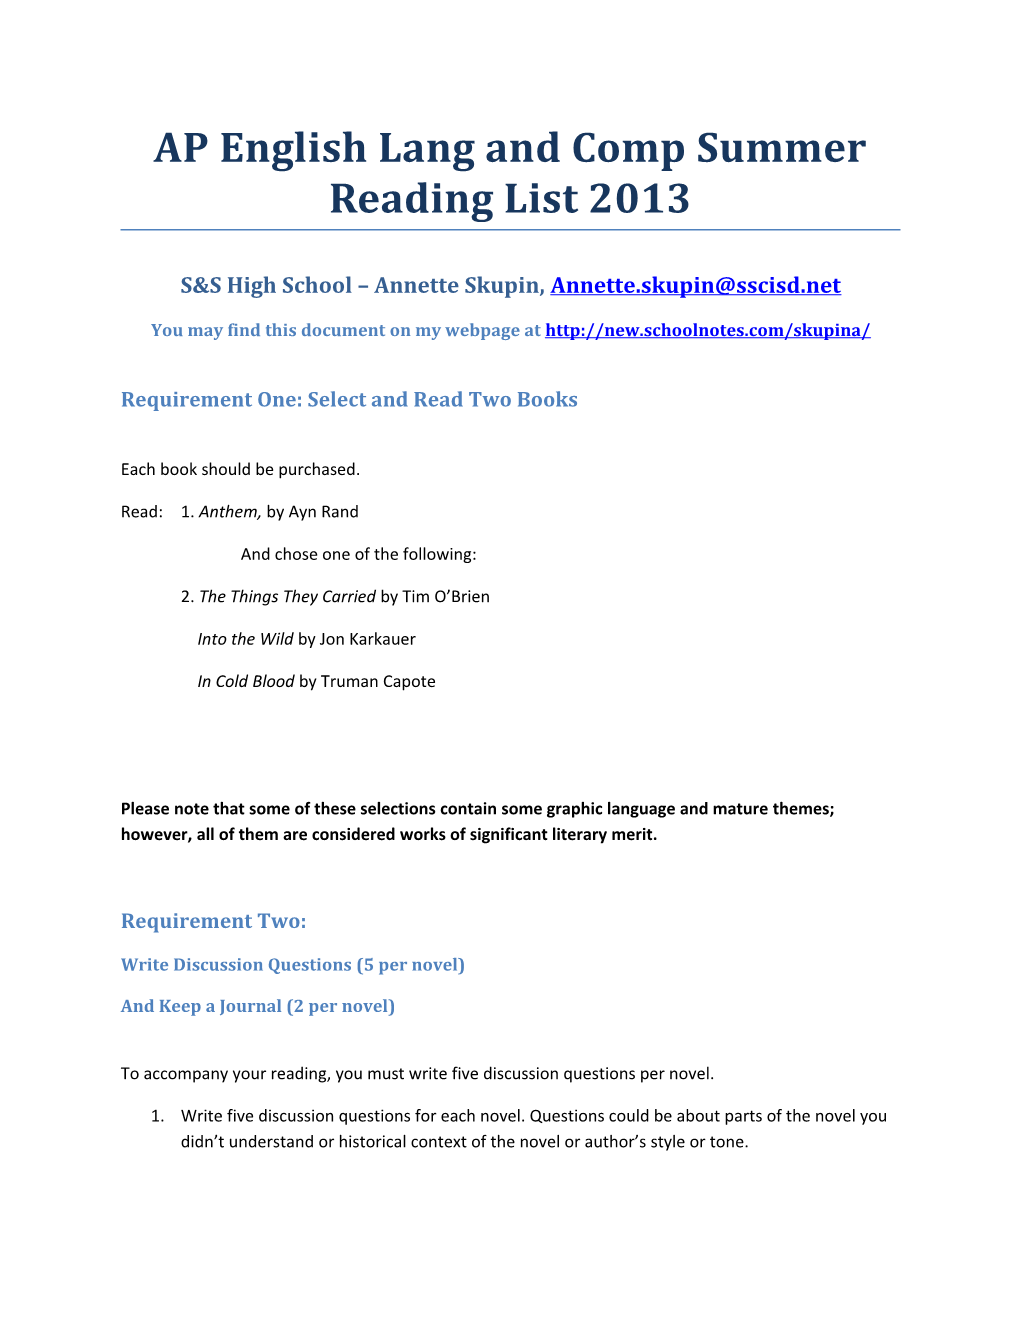 AP English Lang and Comp Summer Reading List 2013